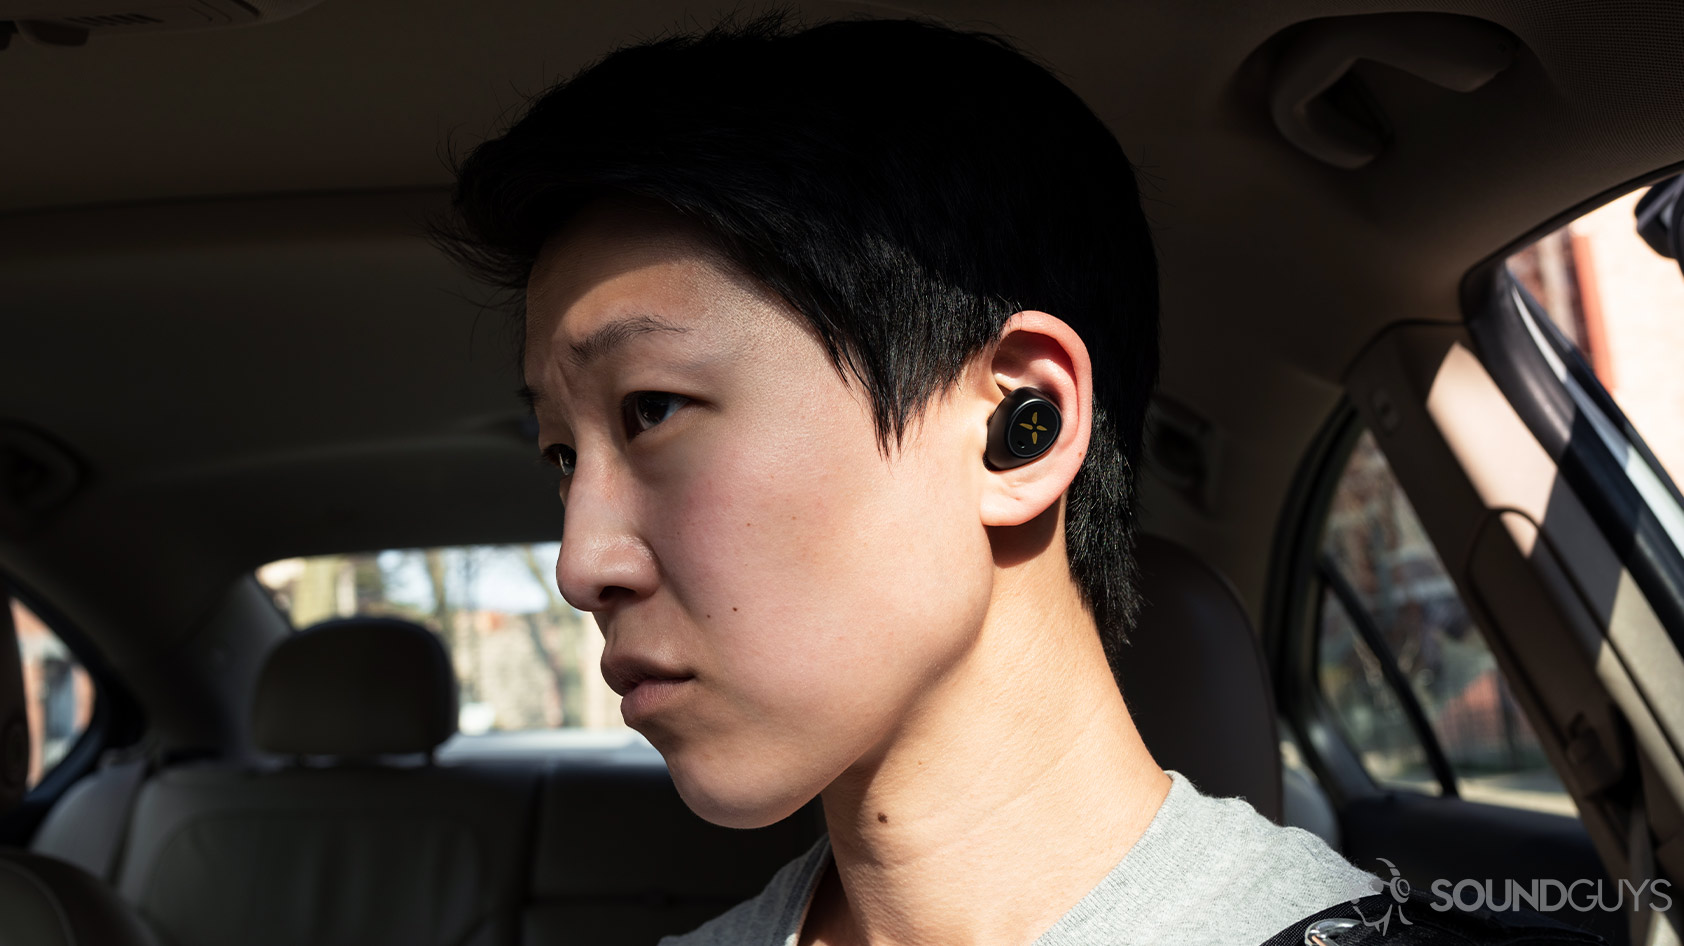 A picture of the Klipsch S1 True Wireless earbuds being worn by a woman in a parked car.